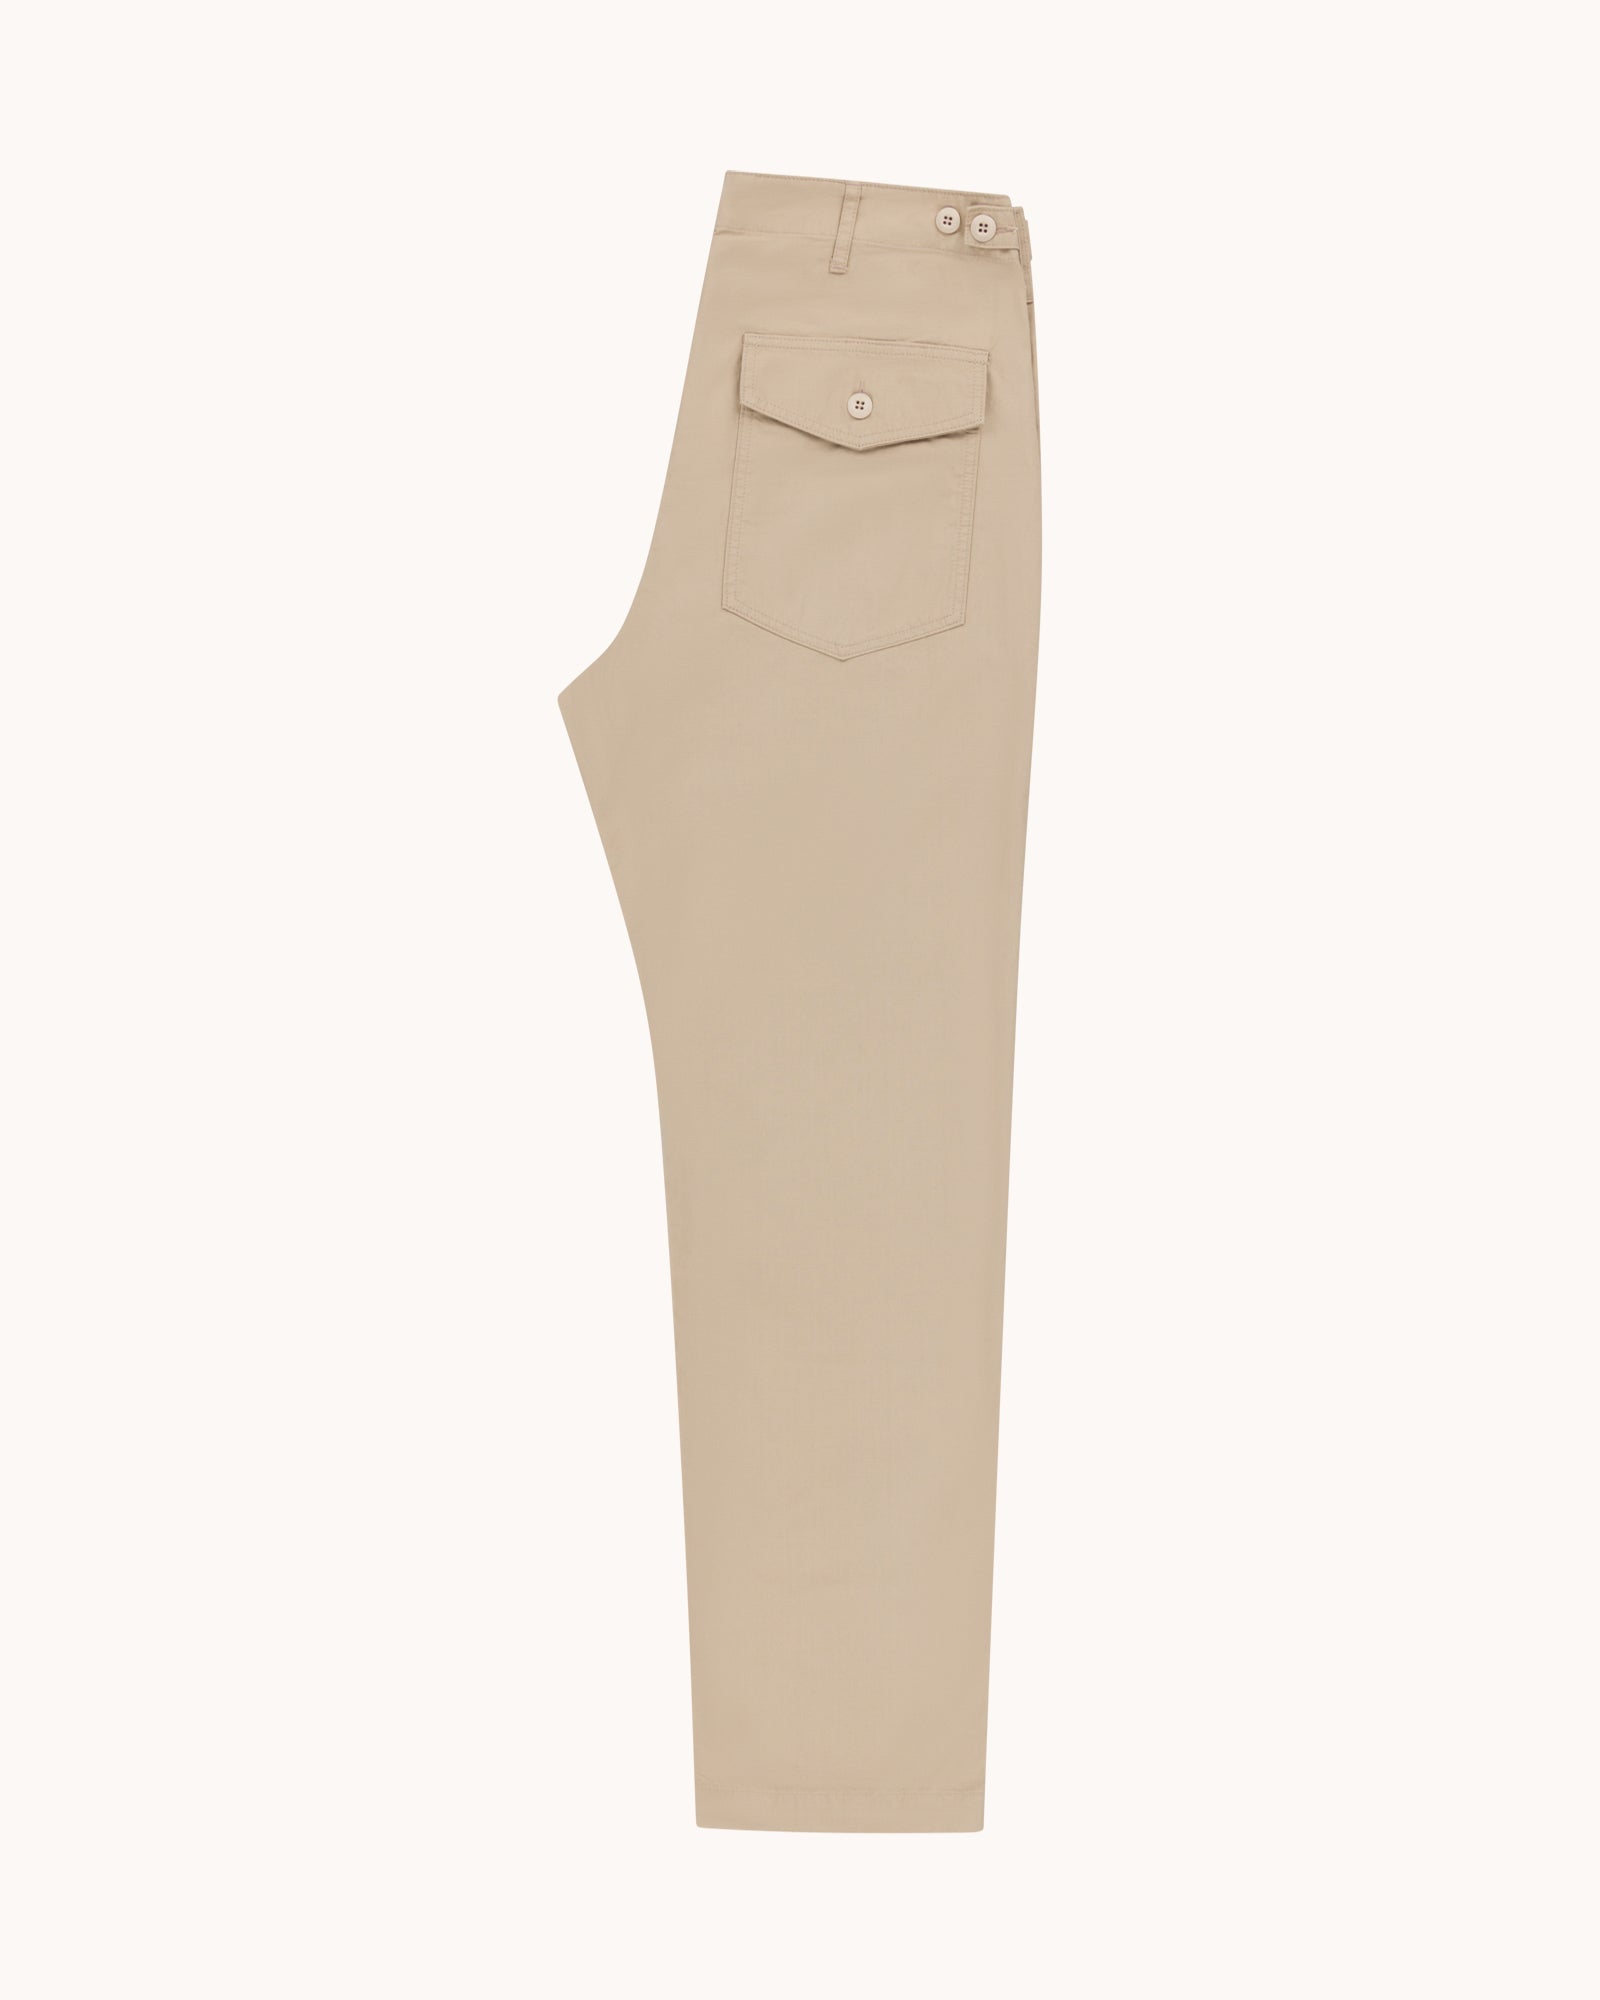 High Rise Japanese Ripstop Fatigue Pant - Beige